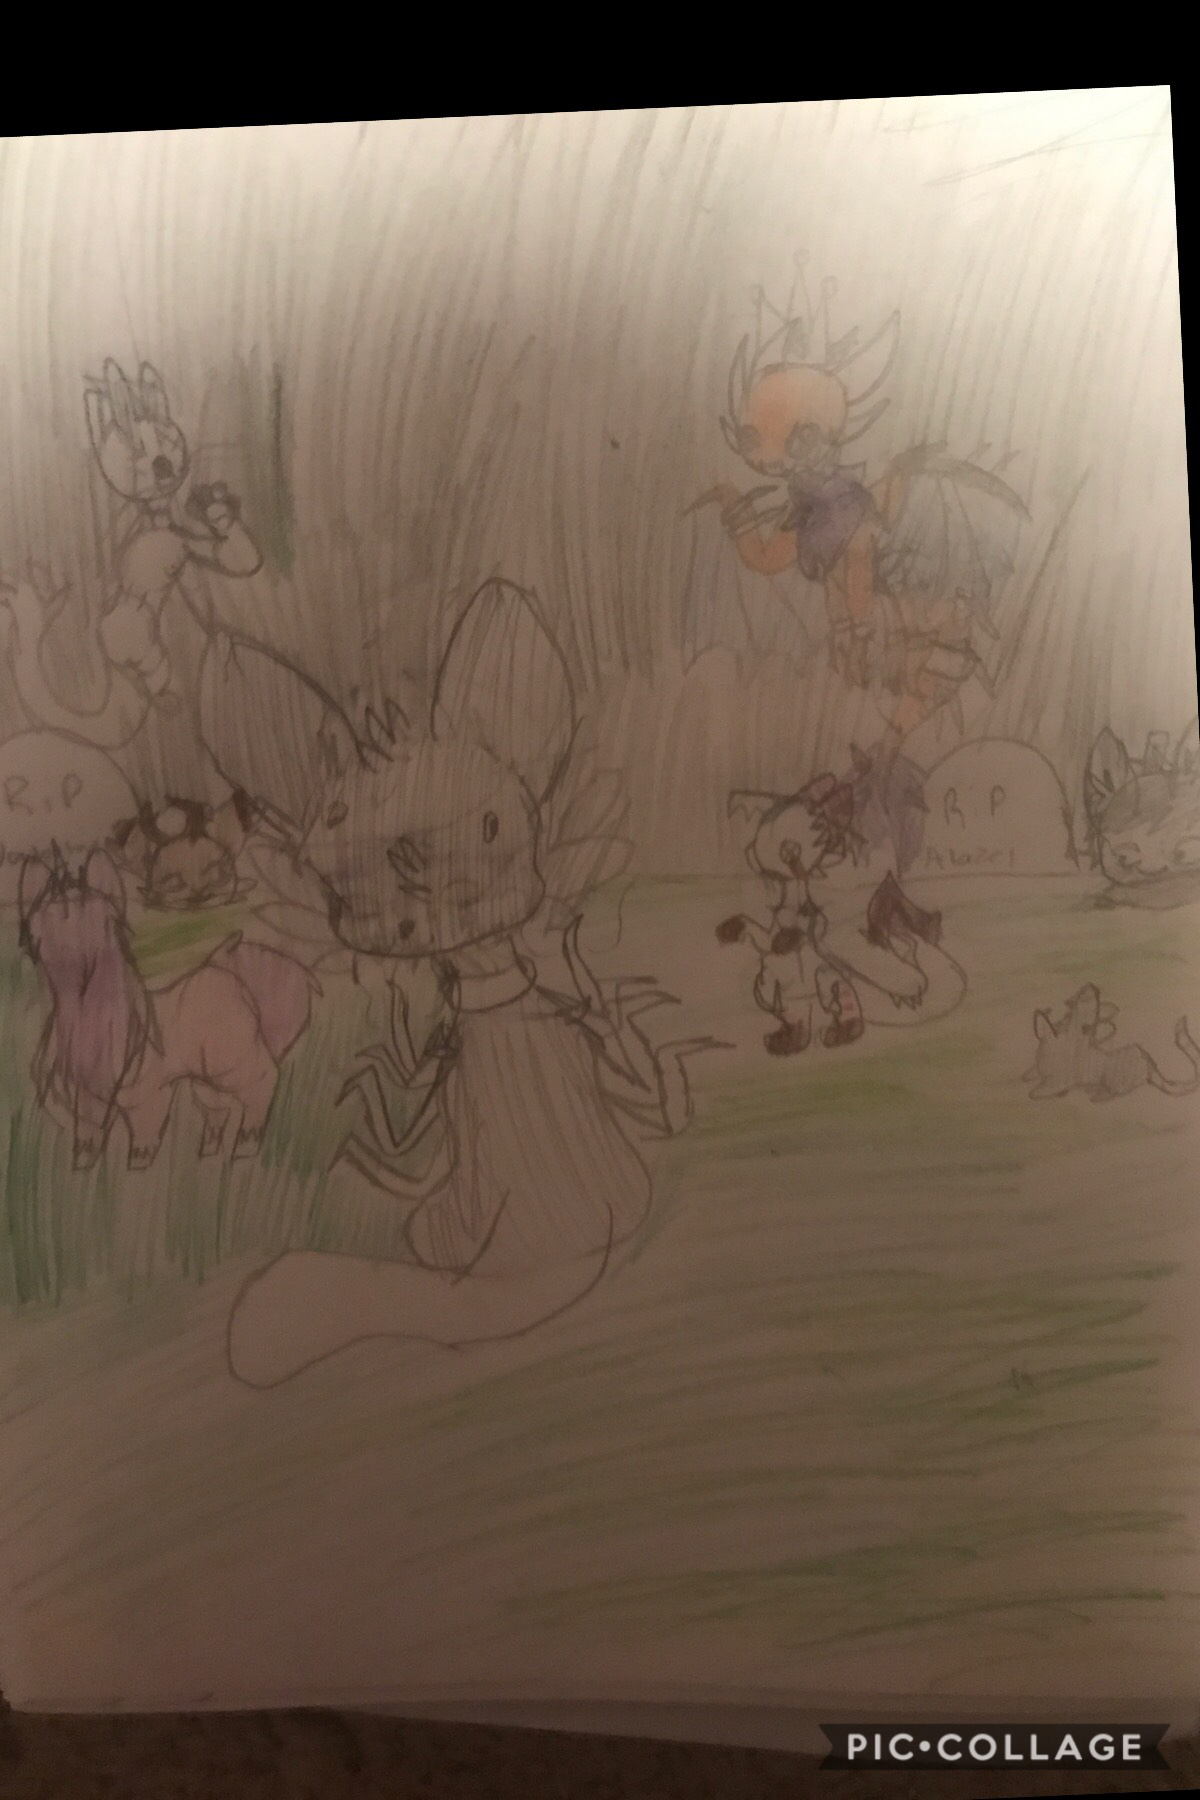 Tap
A bit better quality anyways people in this drawing are: voodoothecat, WilliowMoon, zzysto, House-of-Bishops, Tinkergirl, skeledont_, and Tezi 